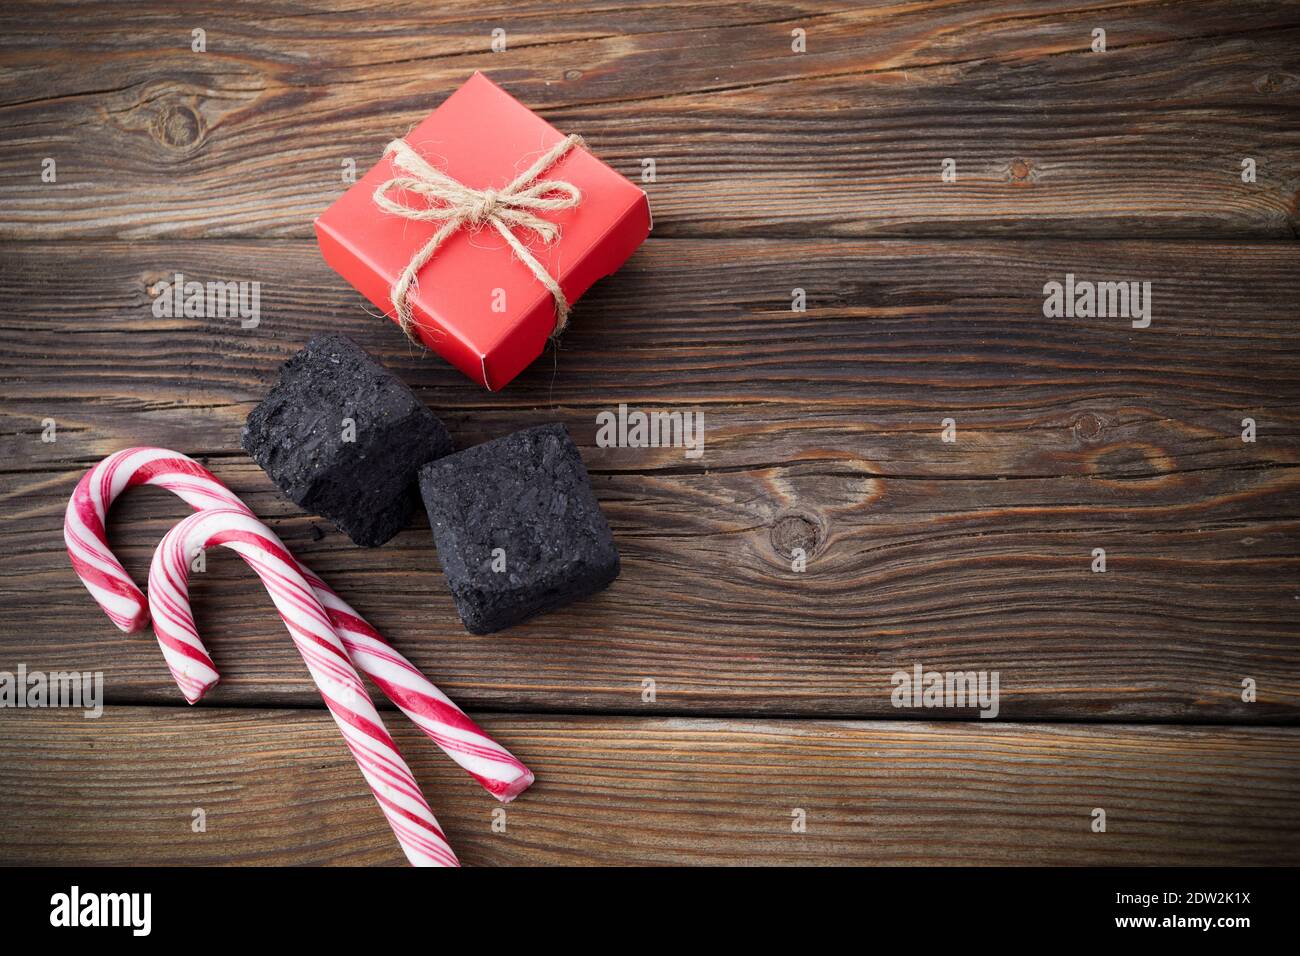 Christmas coal for bad kids and candys or gifts for good children. Christmas tradition in many countries. Stock Photo